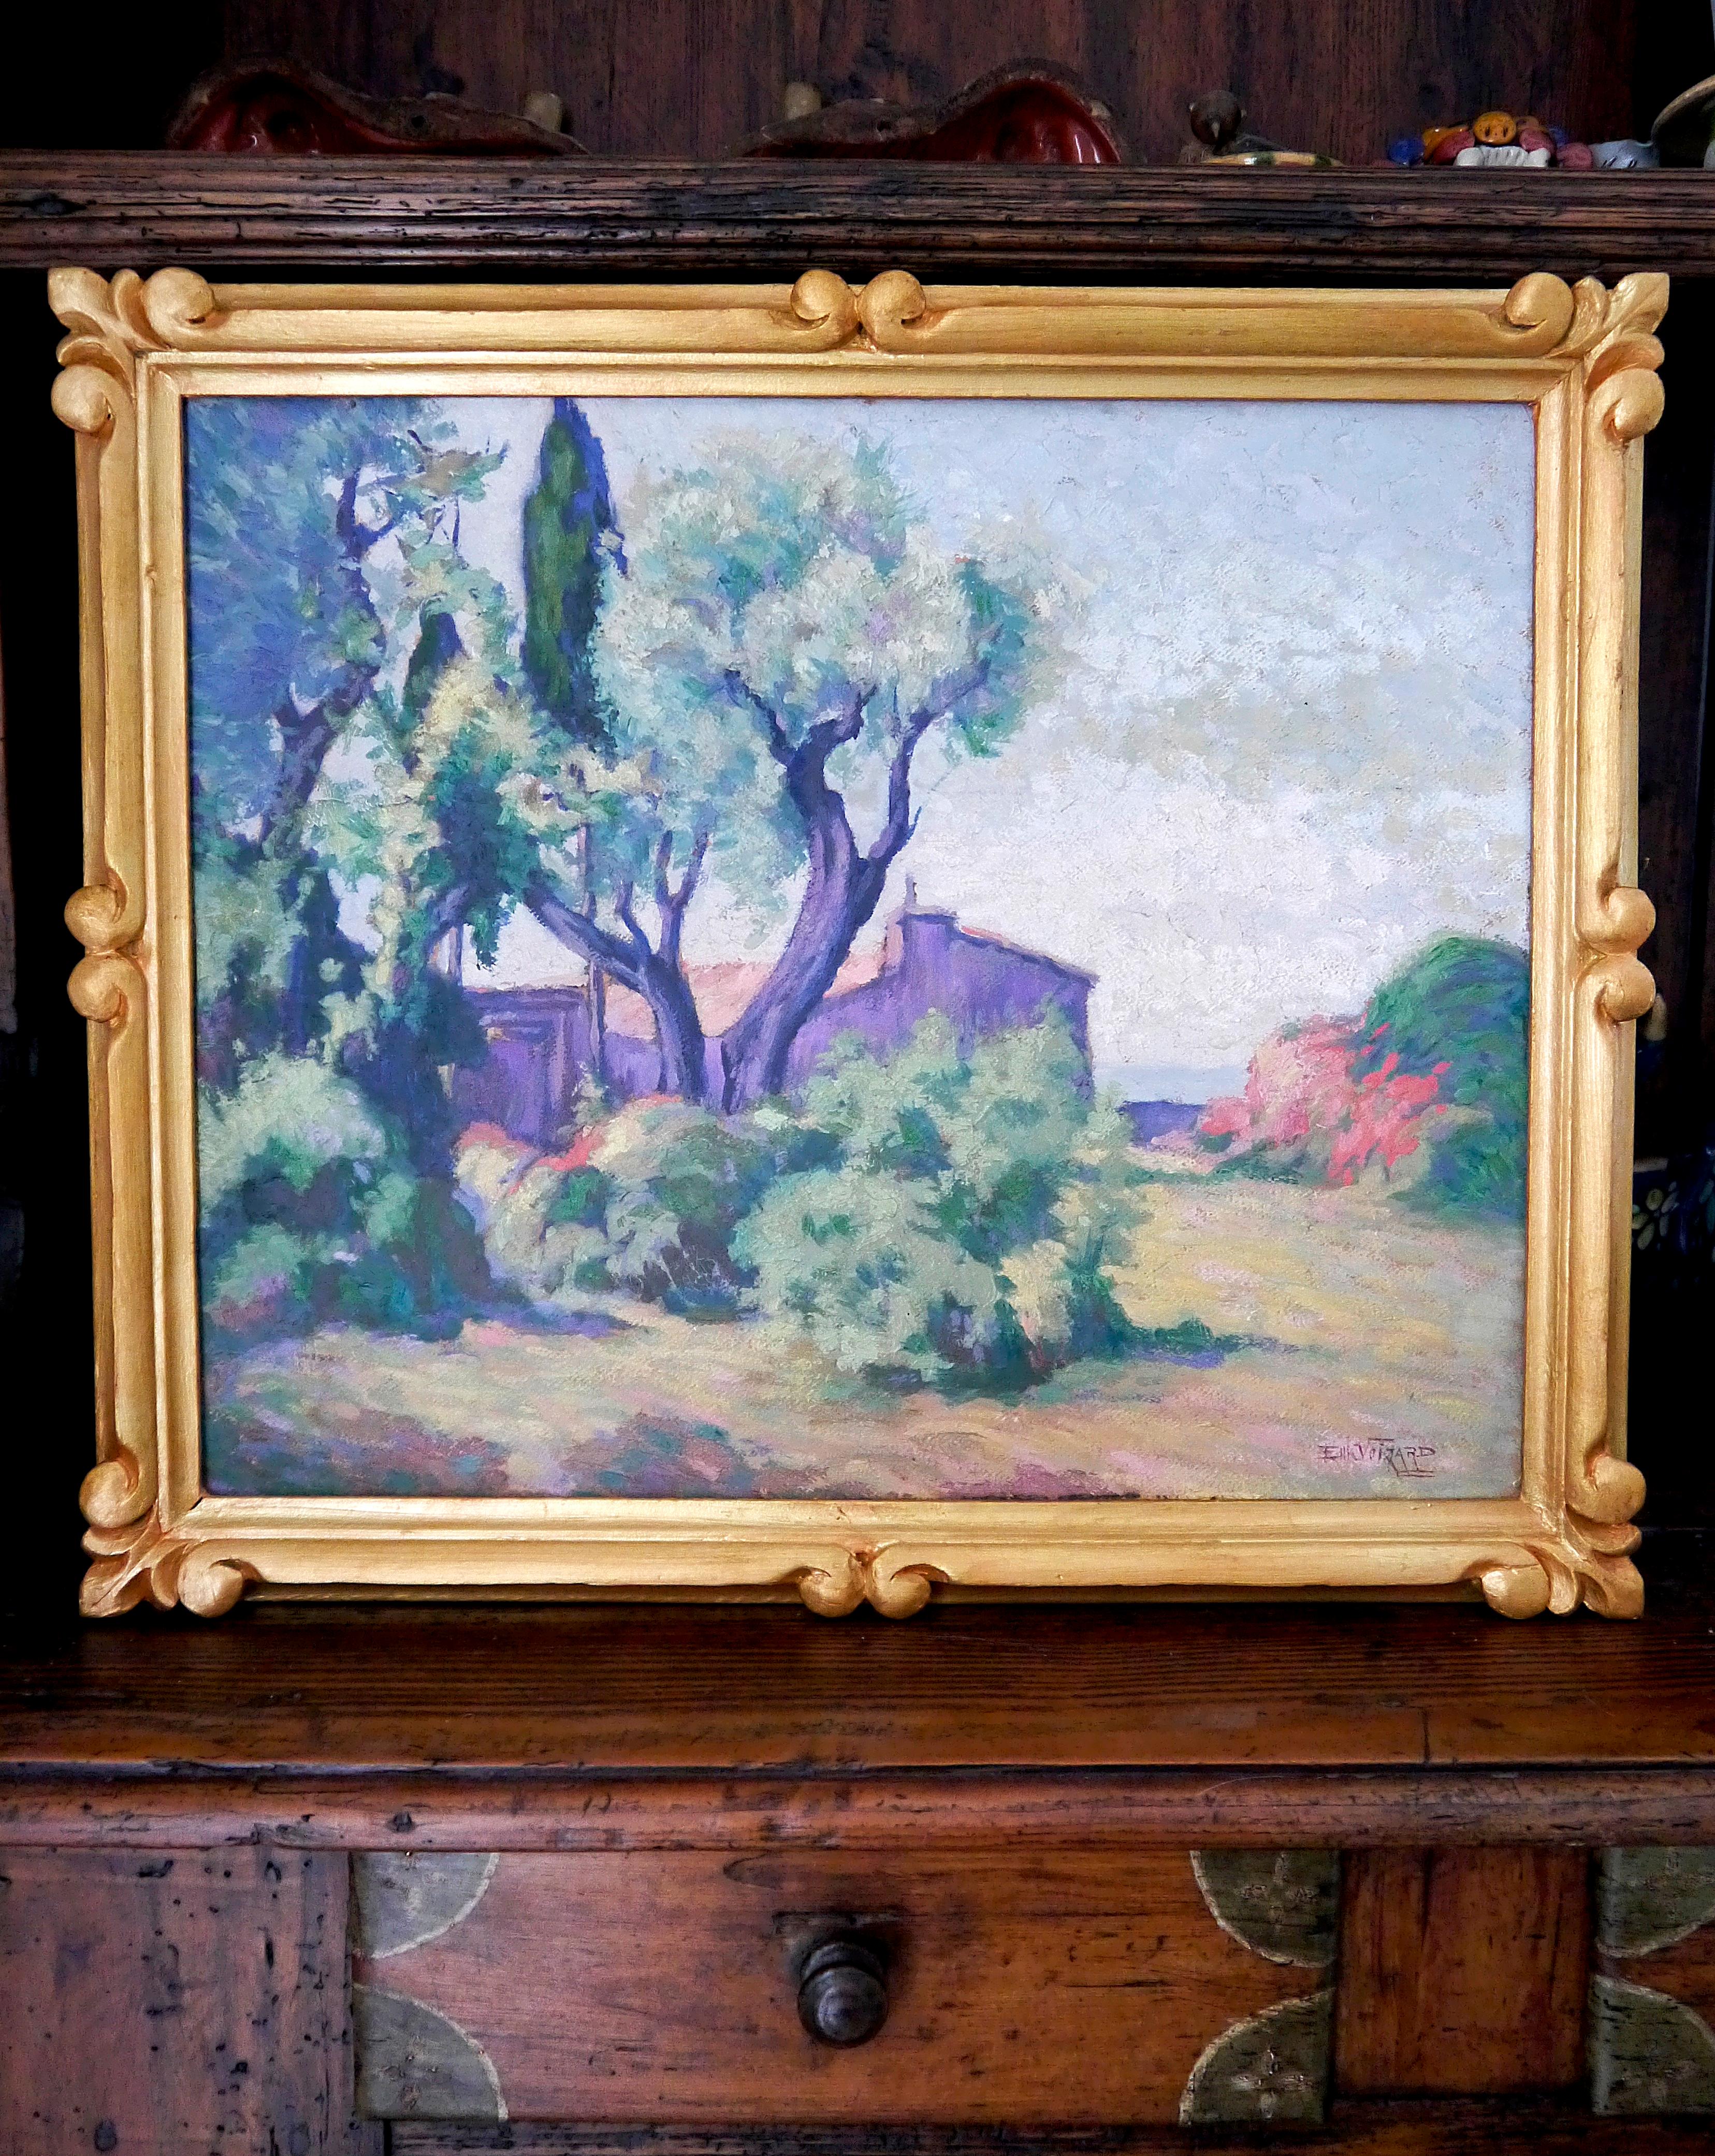 Provencal landscape from Emile Voizard

_ According to the  Agorha INA archive, Emile Voizard, was born in 1881, was a student of Fine arts school in Paris, in 1900.   He retains the  the form of the composition and the drawing; but he quickly